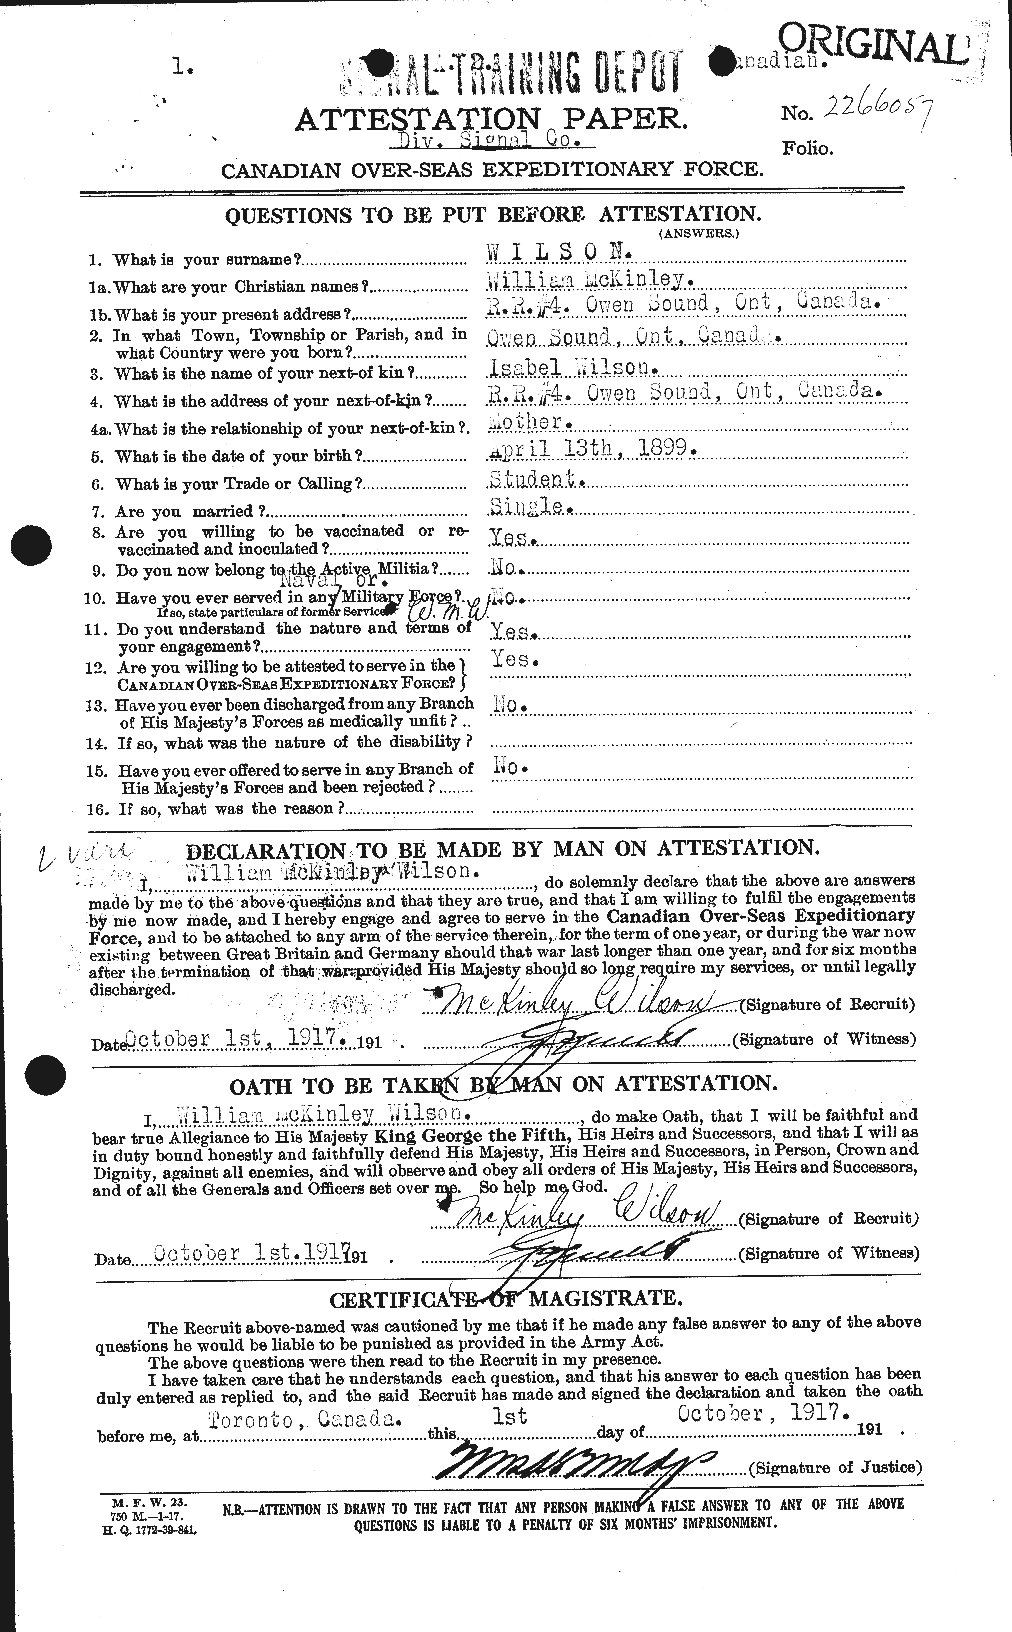 Personnel Records of the First World War - CEF 684075a